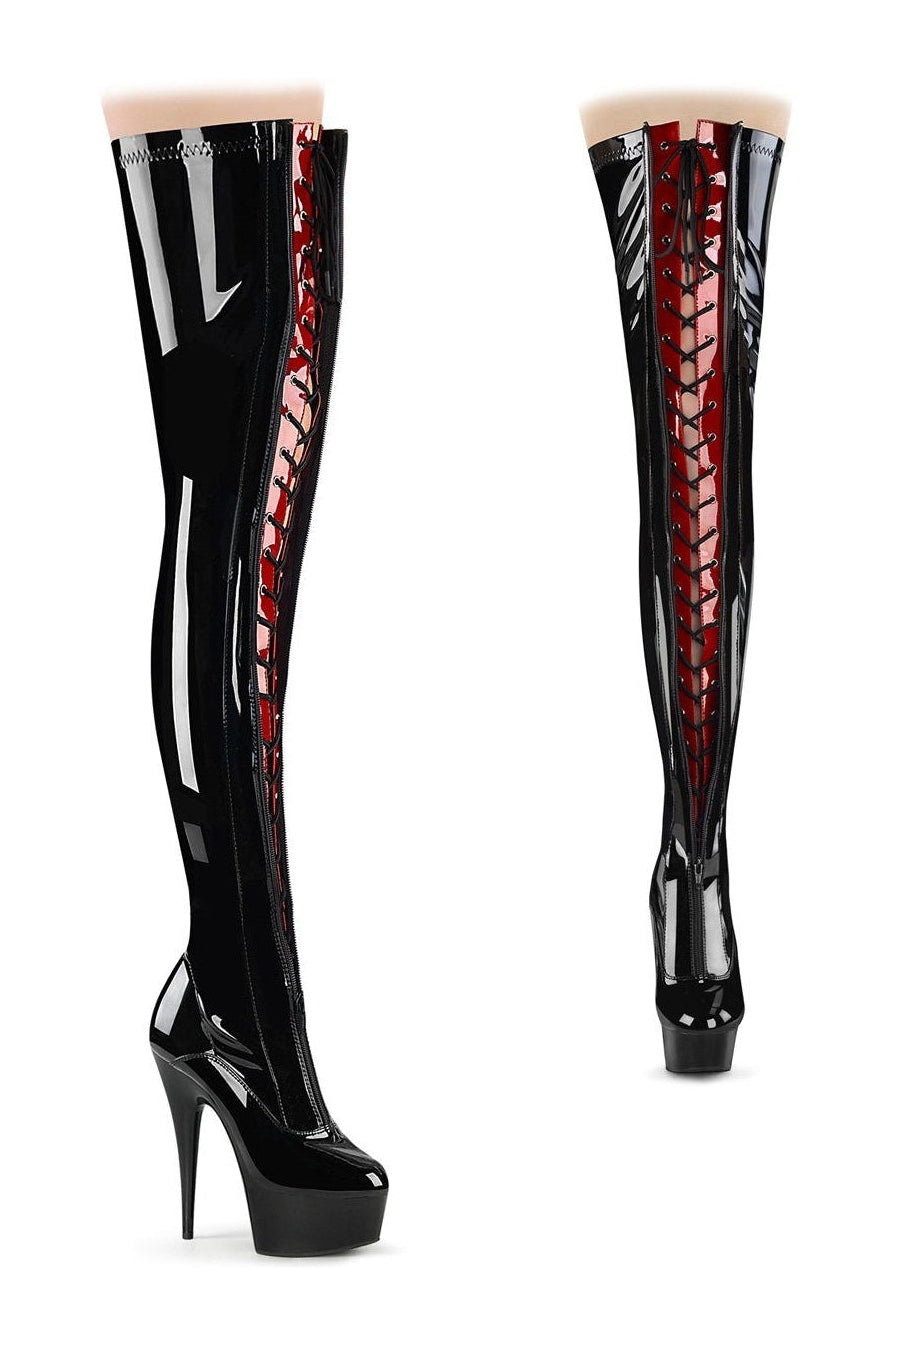 DELIGHT-3027 Thigh Boot | Black Patent-Thigh Boots-Pleaser-Black-12-Patent-SEXYSHOES.COM